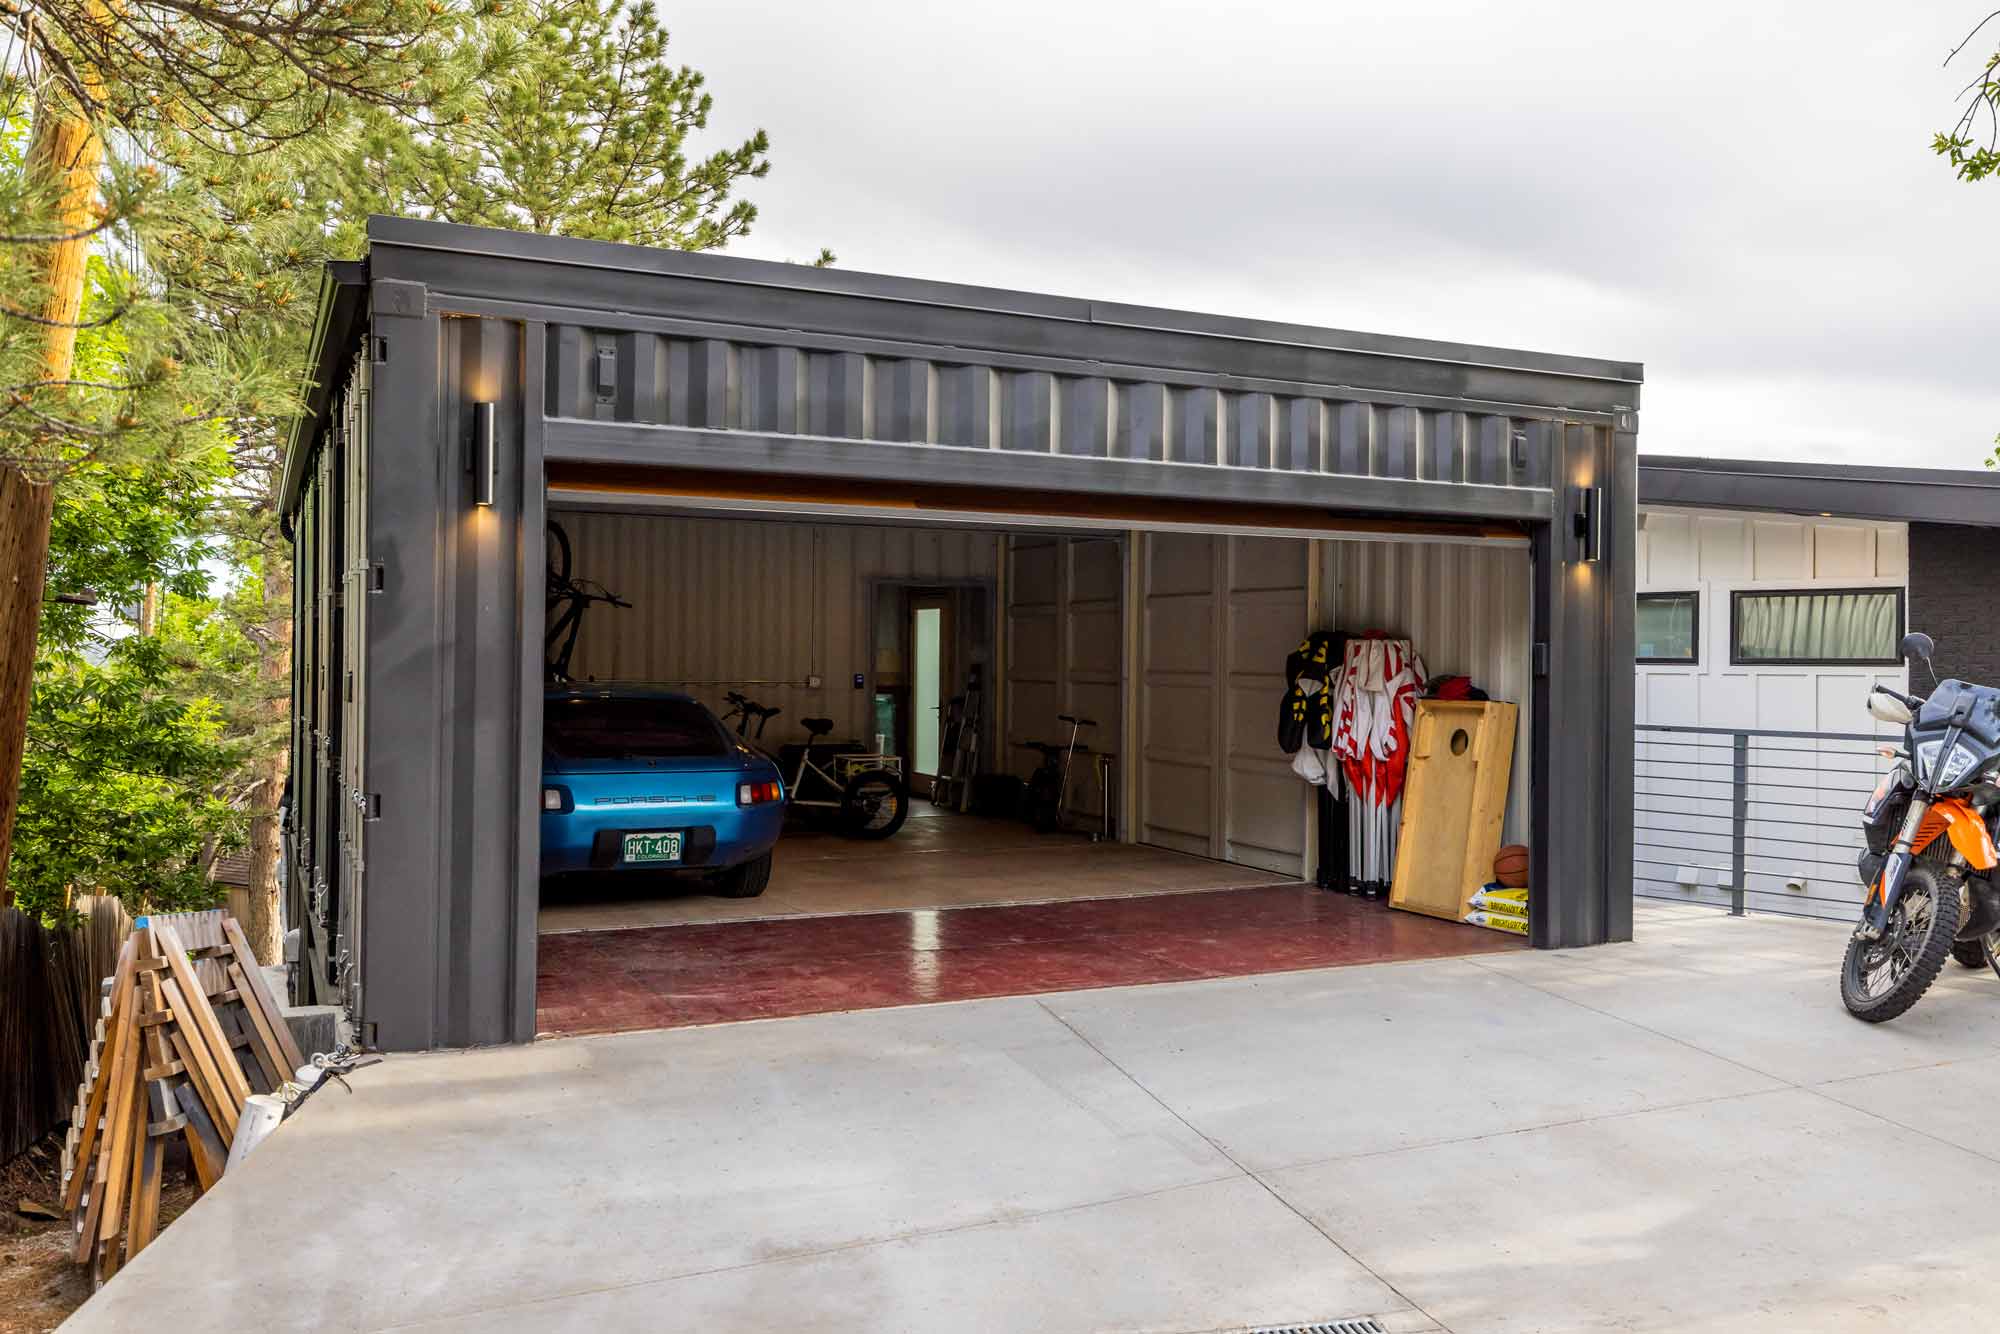 https://www.roxboxcontainers.com/wp-content/uploads/2022/06/B6-Bruder-Design-House-Garage-for-Web.jpg